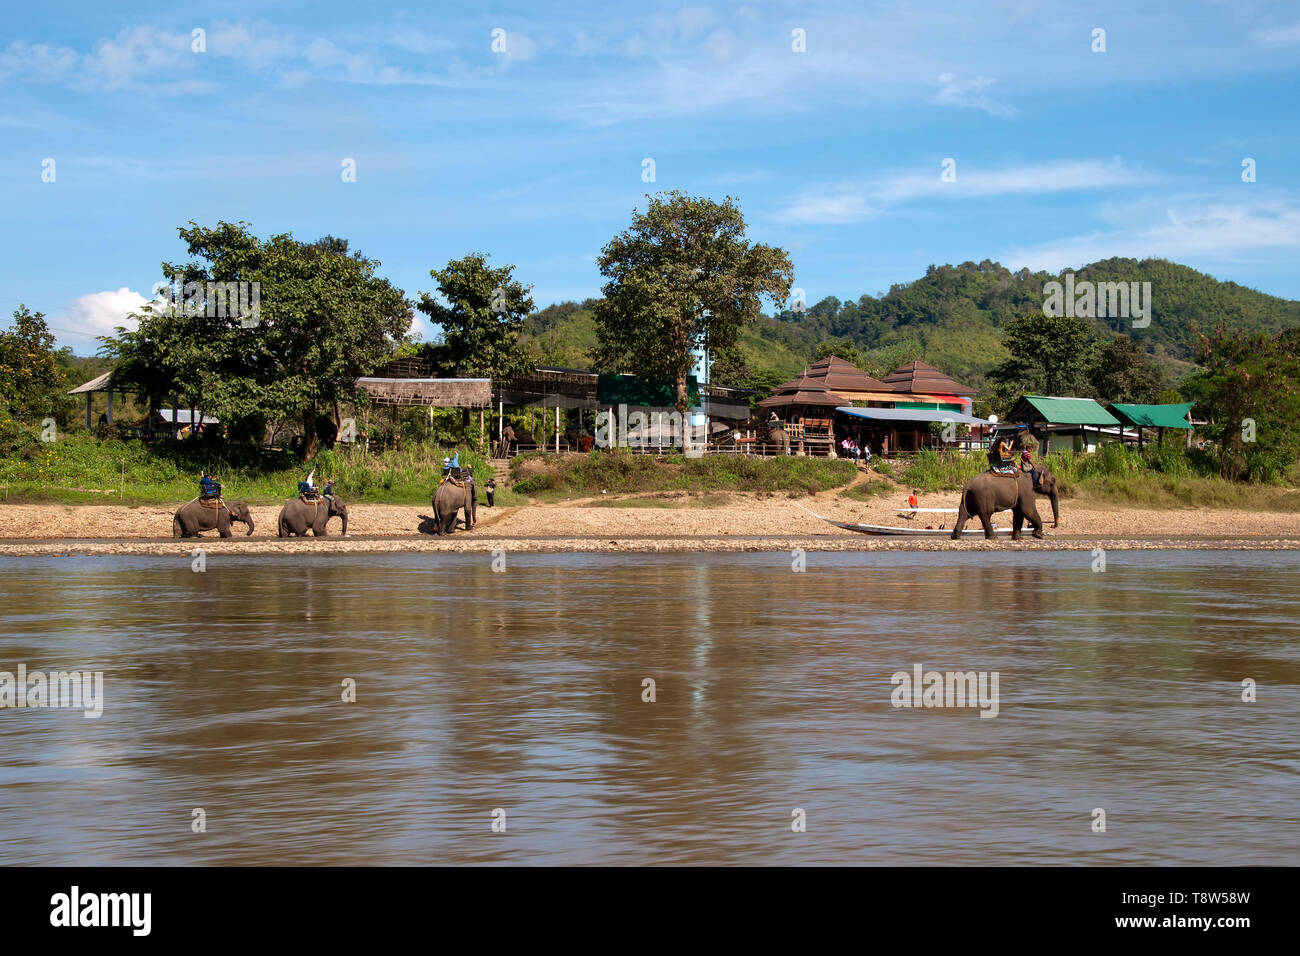 Chiang Rai Thailand Jan 4 2019, tourists taking elephant ride along the river with camp/village in background Stock Photo